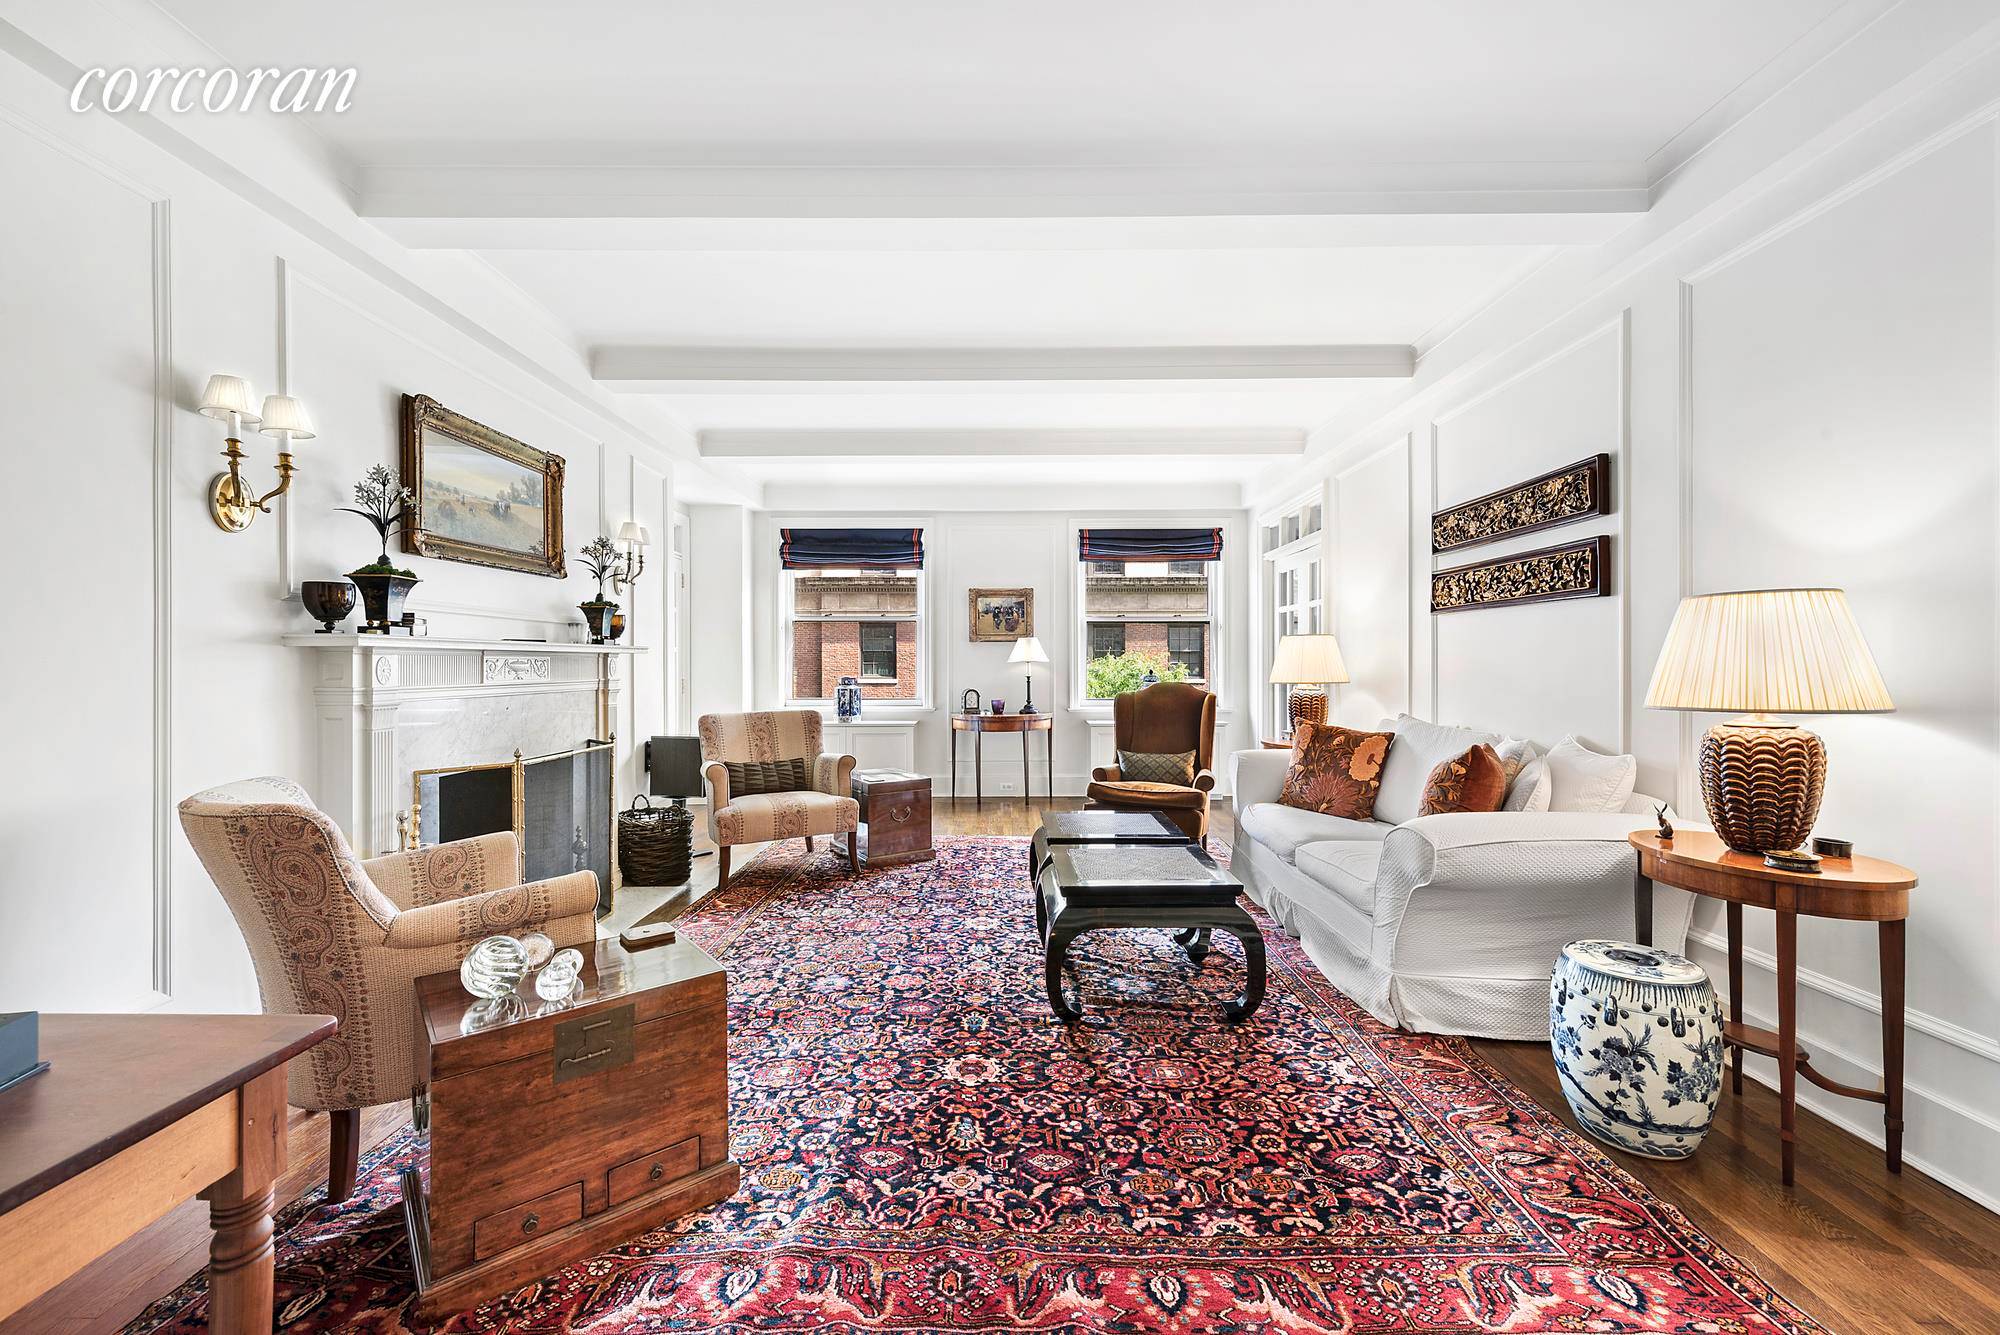 1158 Fifth Avenue is a wonderful 8 room located in Carnegie Hill.